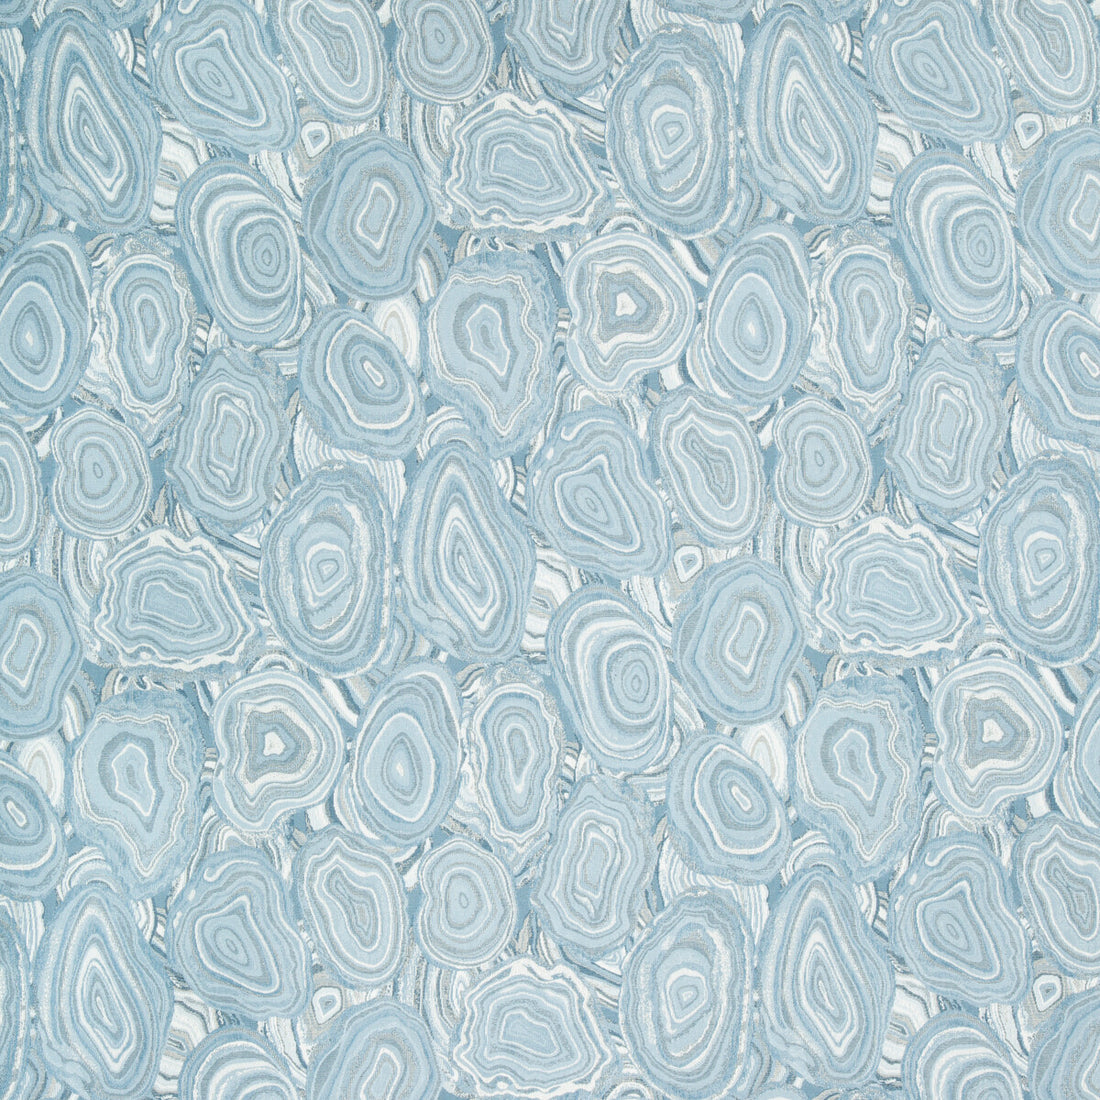 Kravet Contract fabric in 34761-5 color - pattern 34761.5.0 - by Kravet Contract in the Crypton Incase collection